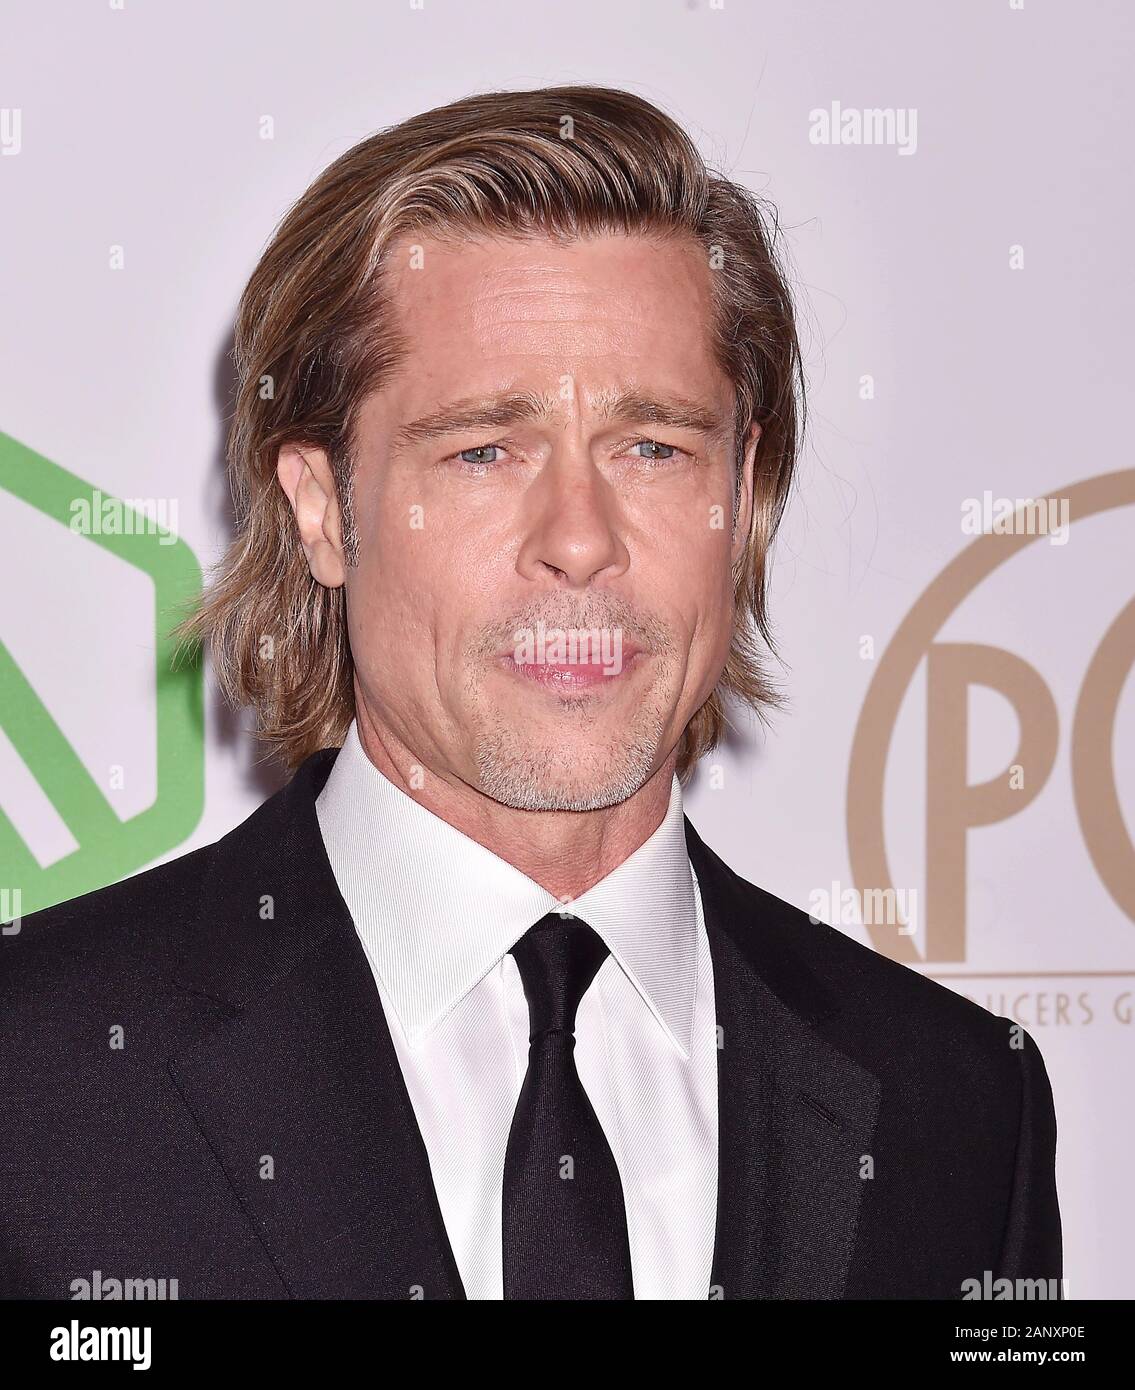 HOLLYWOOD, CA - JANUARY 18: Brad Pitt attends the 31st Annual Producers Guild Awards at the Hollywood Palladium on January 18, 2020 in Los Angeles, California. Stock Photo